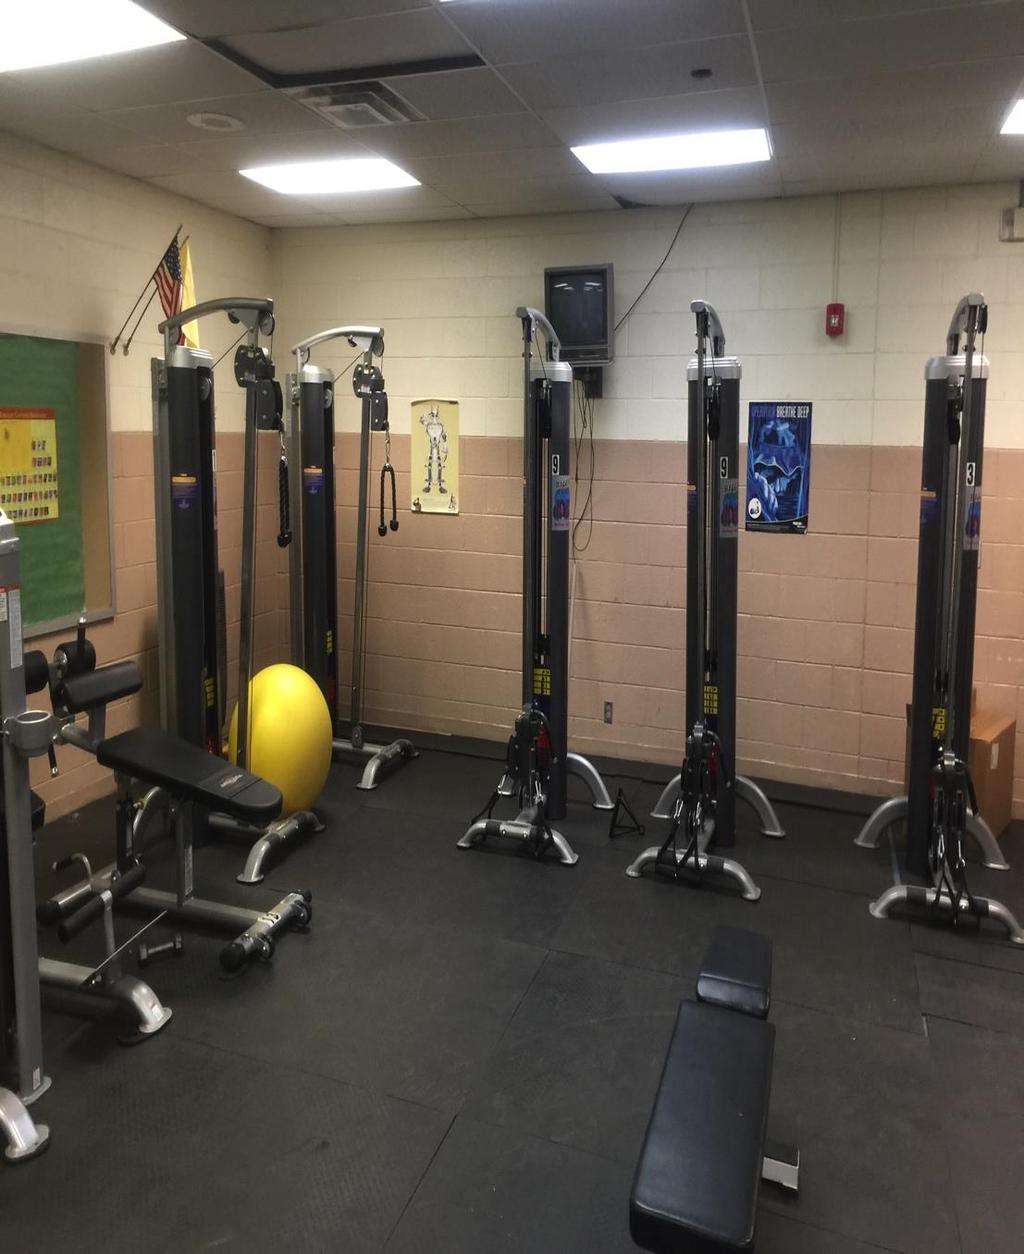 TBA Weight Room Concerns Cardio Equipment/Selector (Cable Equipment: Cardio selector equipment appear to be in good working condition Need additional signage for cardio